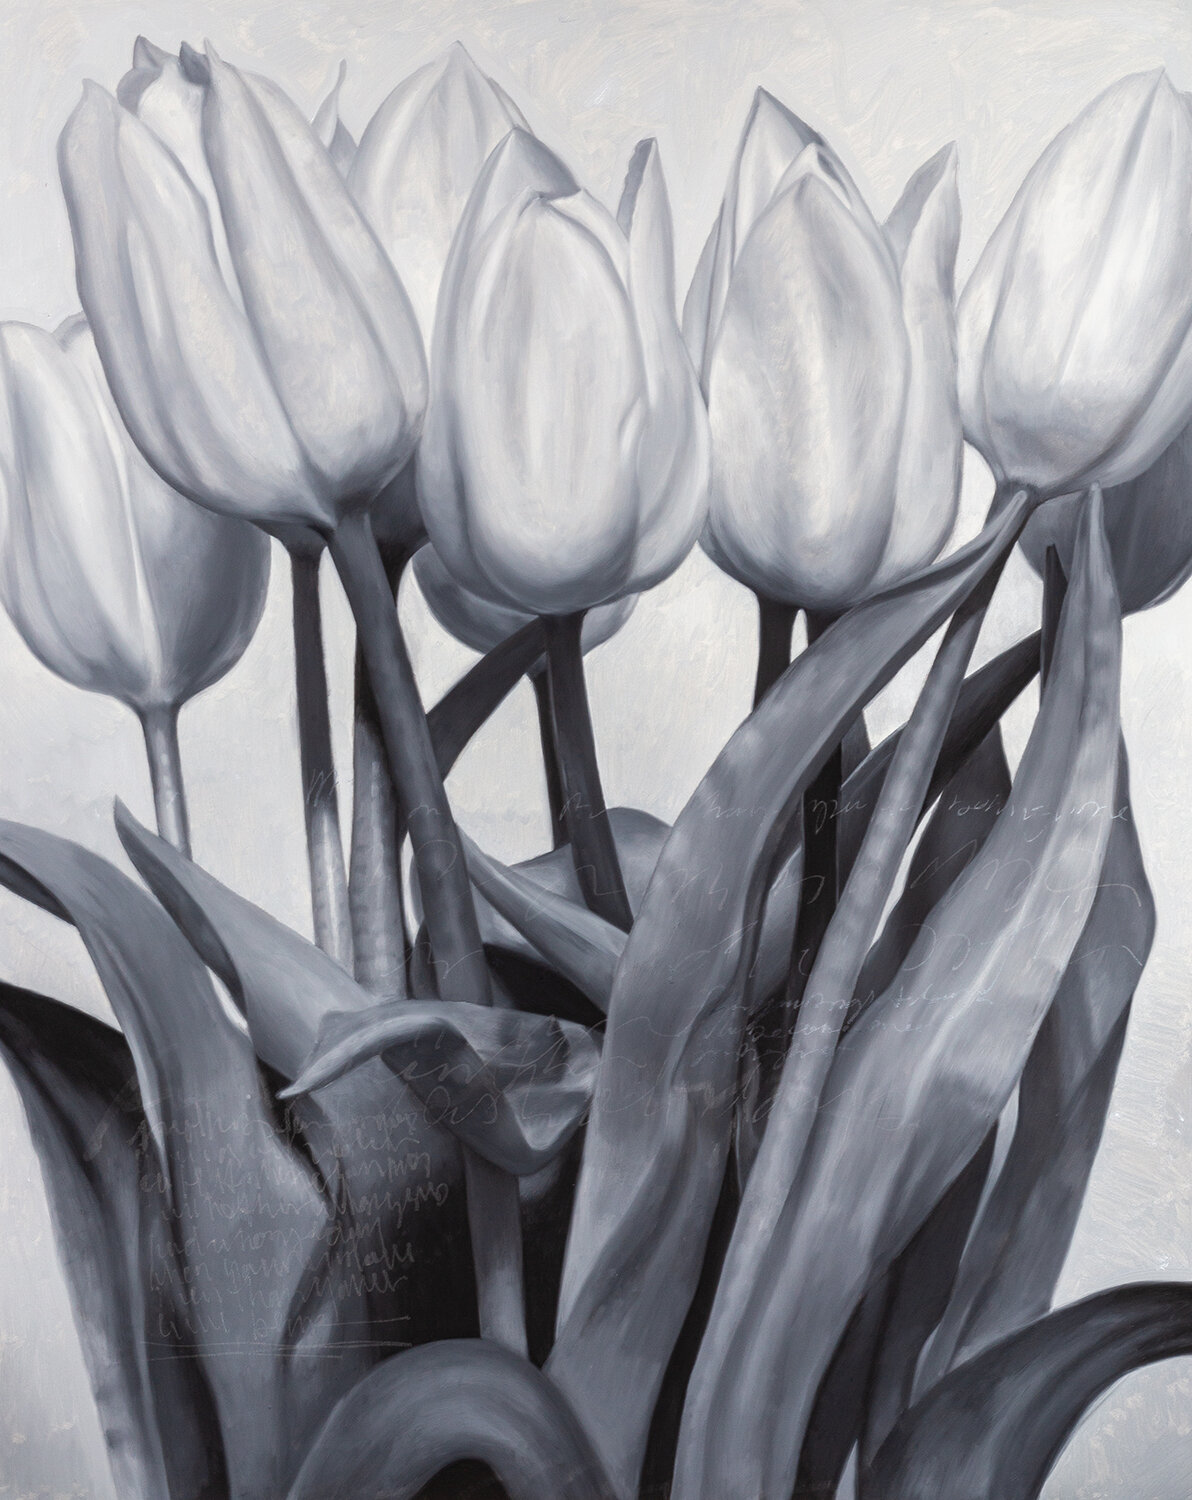   Tulips for Arden  2020 oil and mixed media on canvas 60 x 48 in. / 152.4 x 121.92 cm 